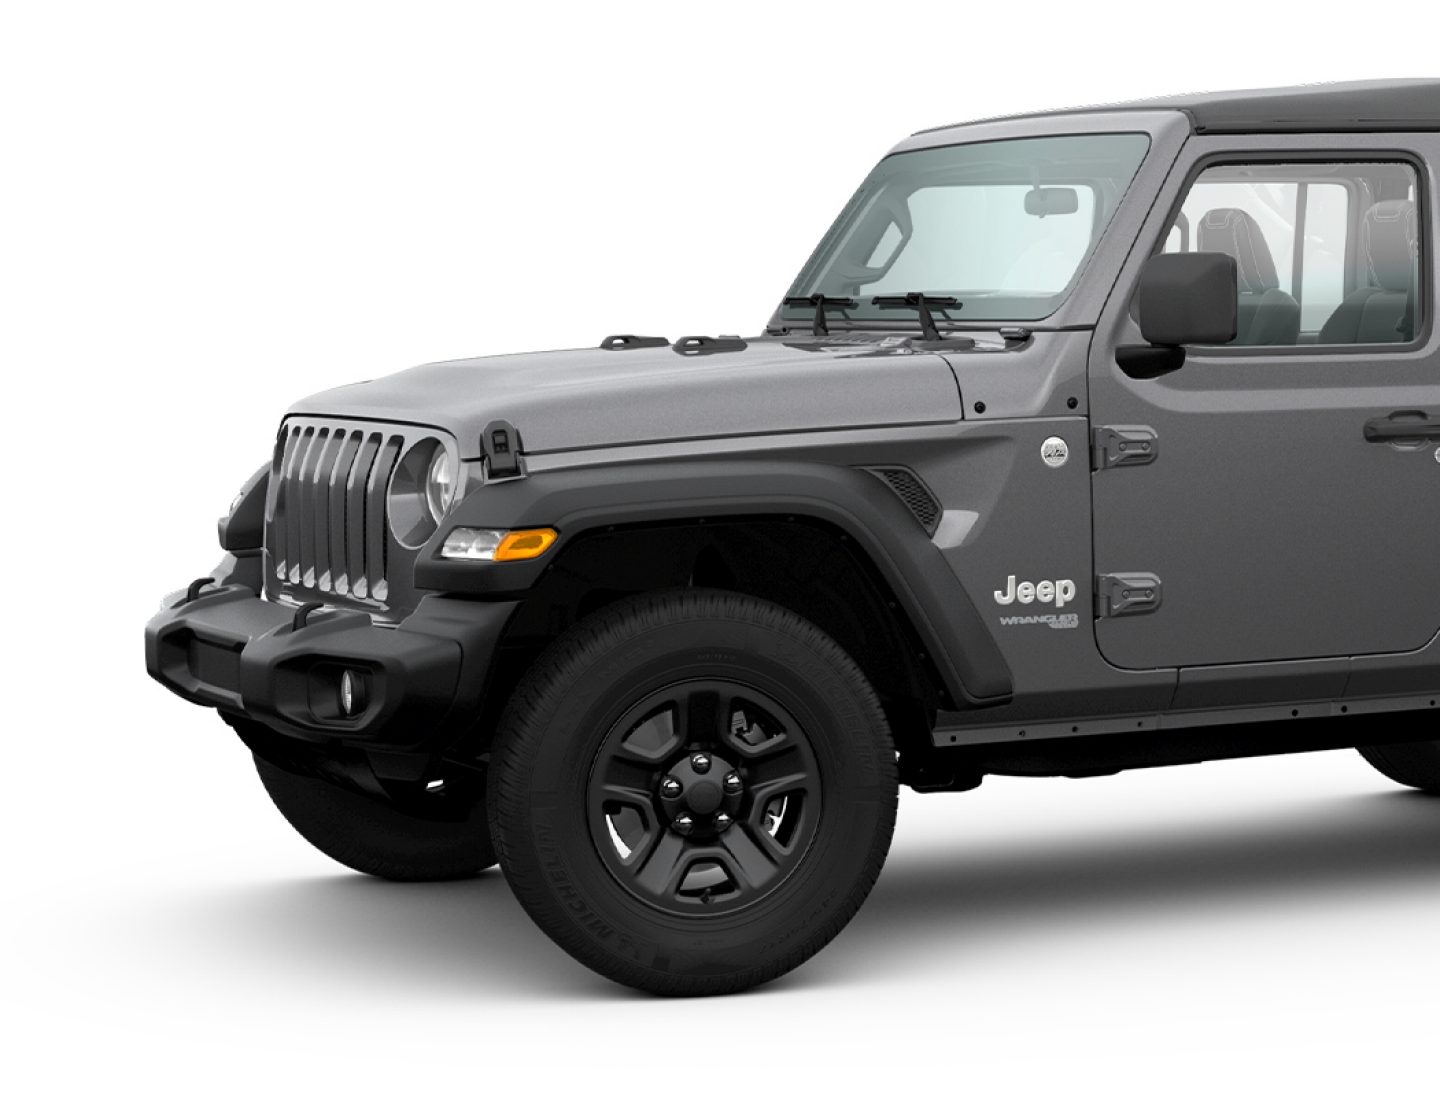 A 2020 Jeep Wrangler Sport with 17-inch black steel styled wheels.